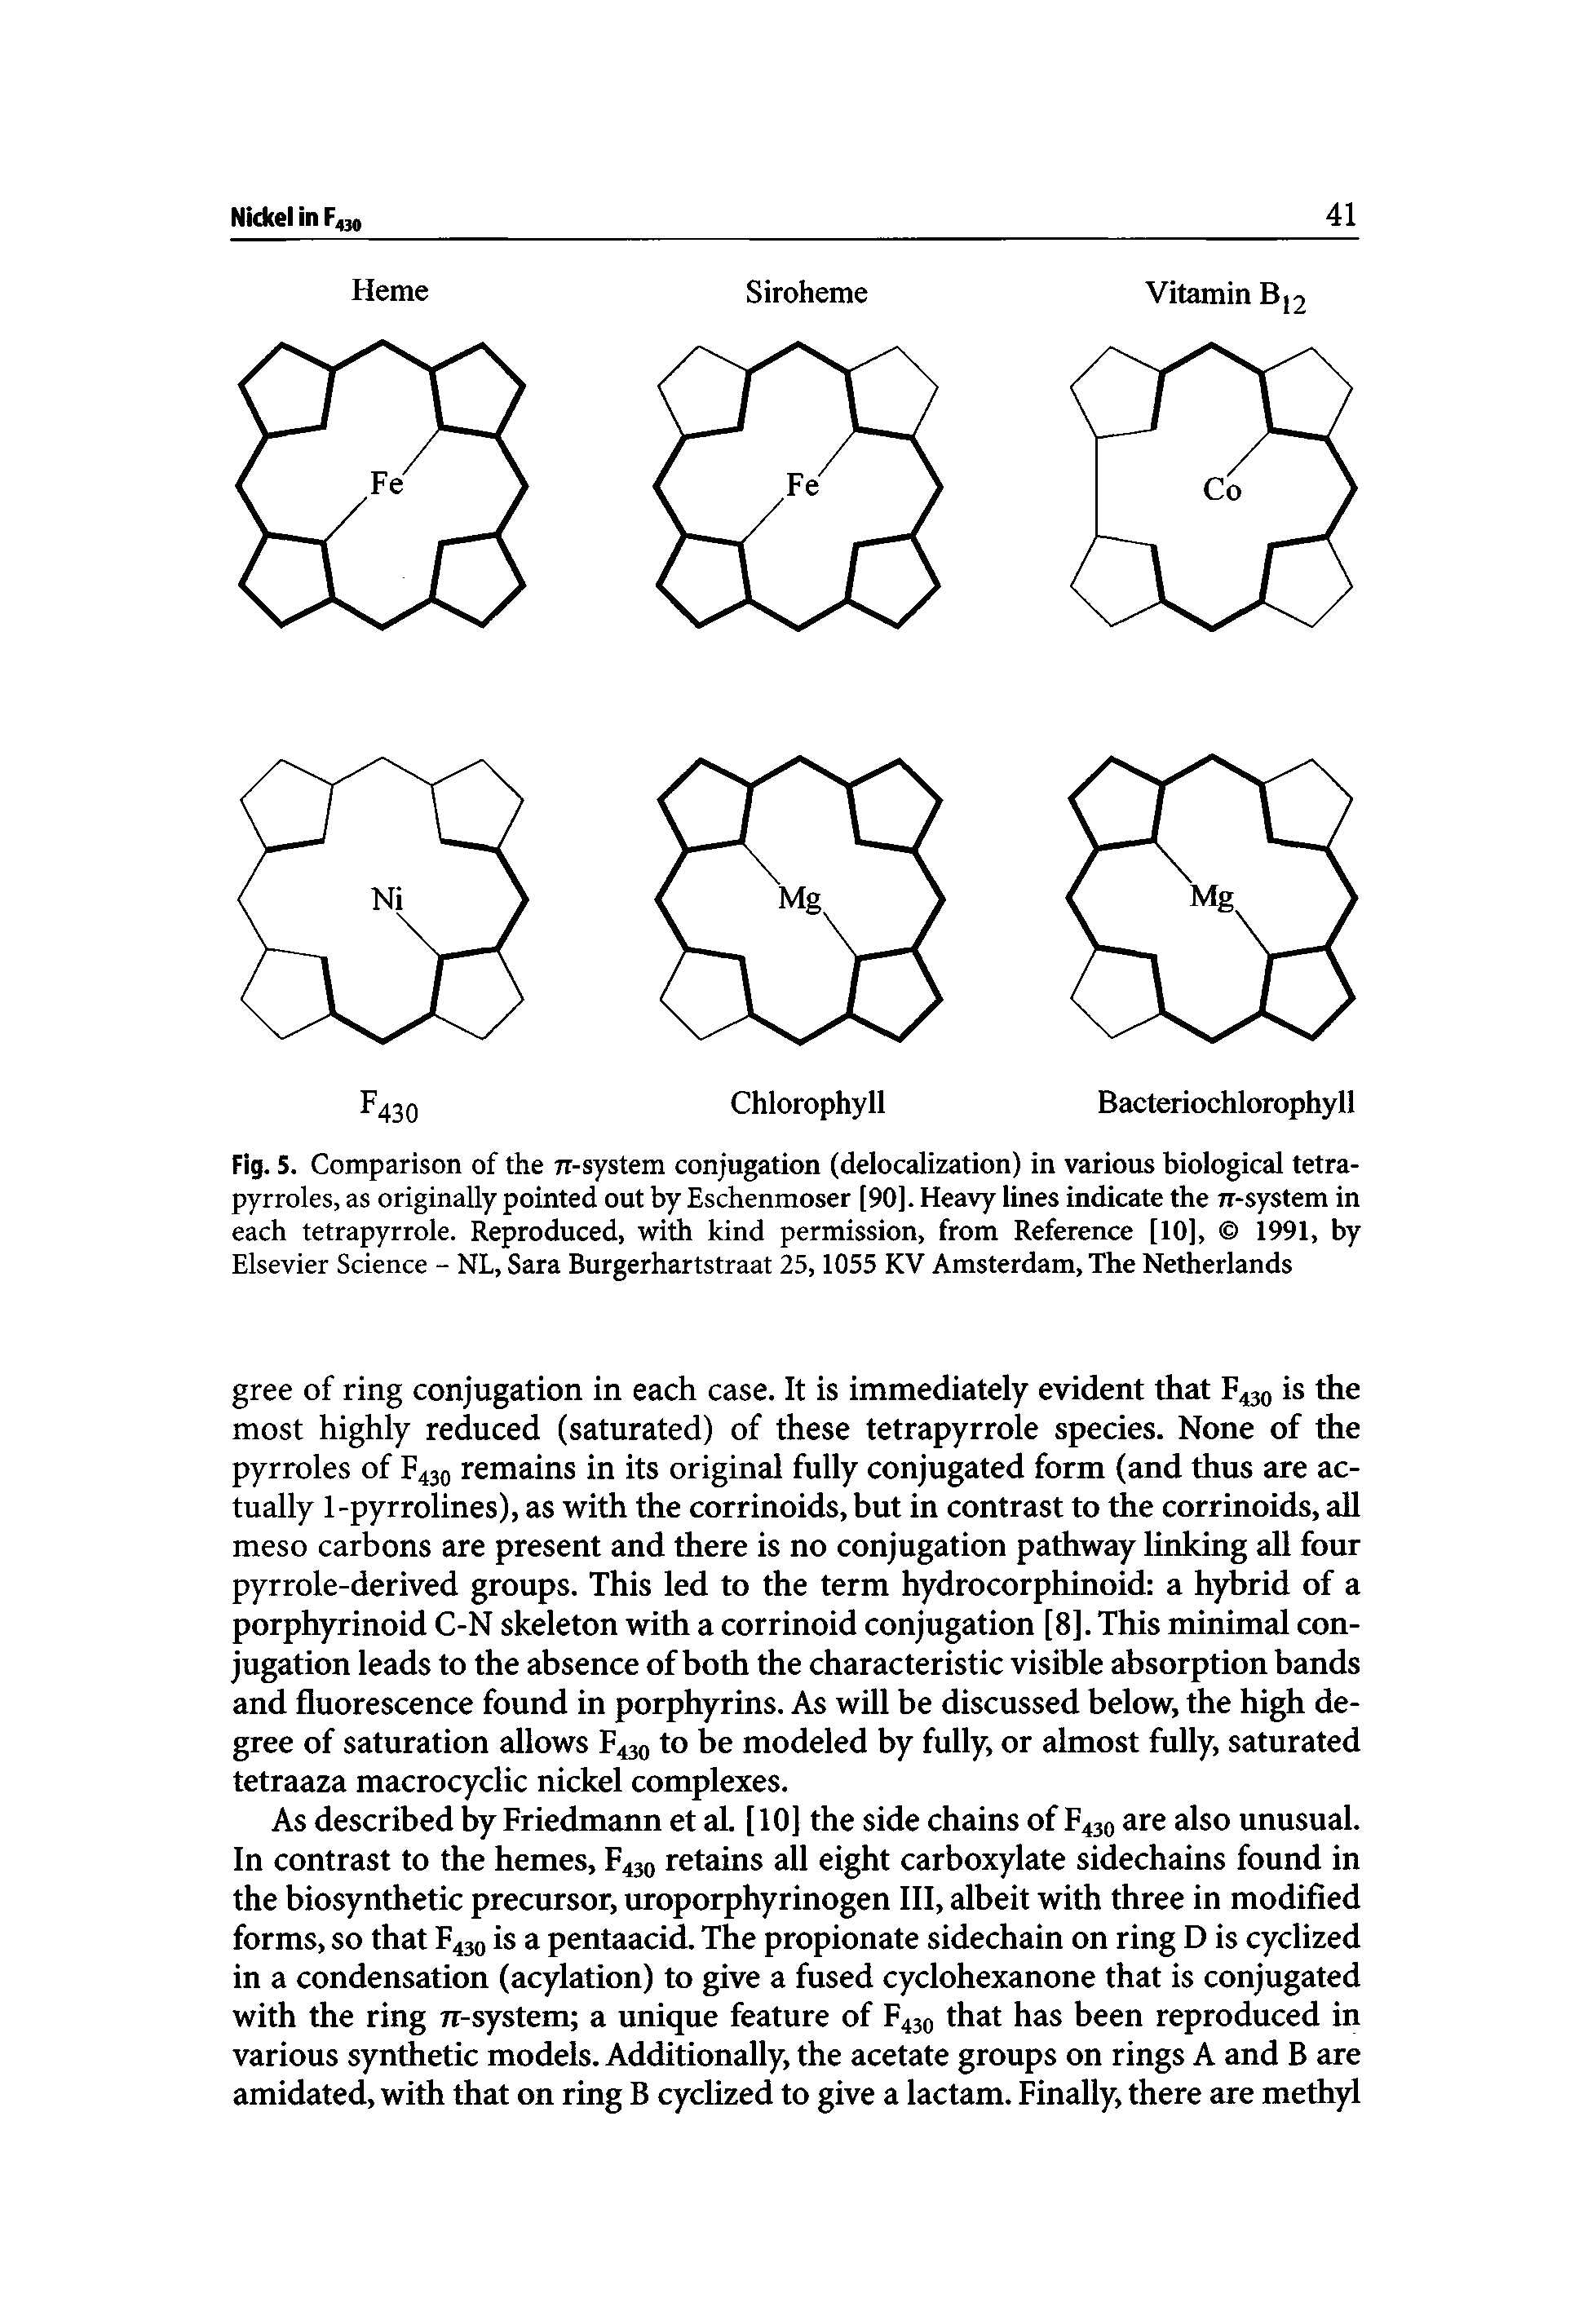 Fig. 5. Comparison of the 71-system conjugation (delocalization) in various biological tetra-pyrroles, as originally pointed out by Eschenmoser [90]. Heavy lines indicate the 7T-system in each tetrapyrrole. Reproduced, with kind permission, from Reference [10], 1991, by Elsevier Science - NL, Sara Burgerhartstraat 25,1055 KV Amsterdam, The Netherlands...